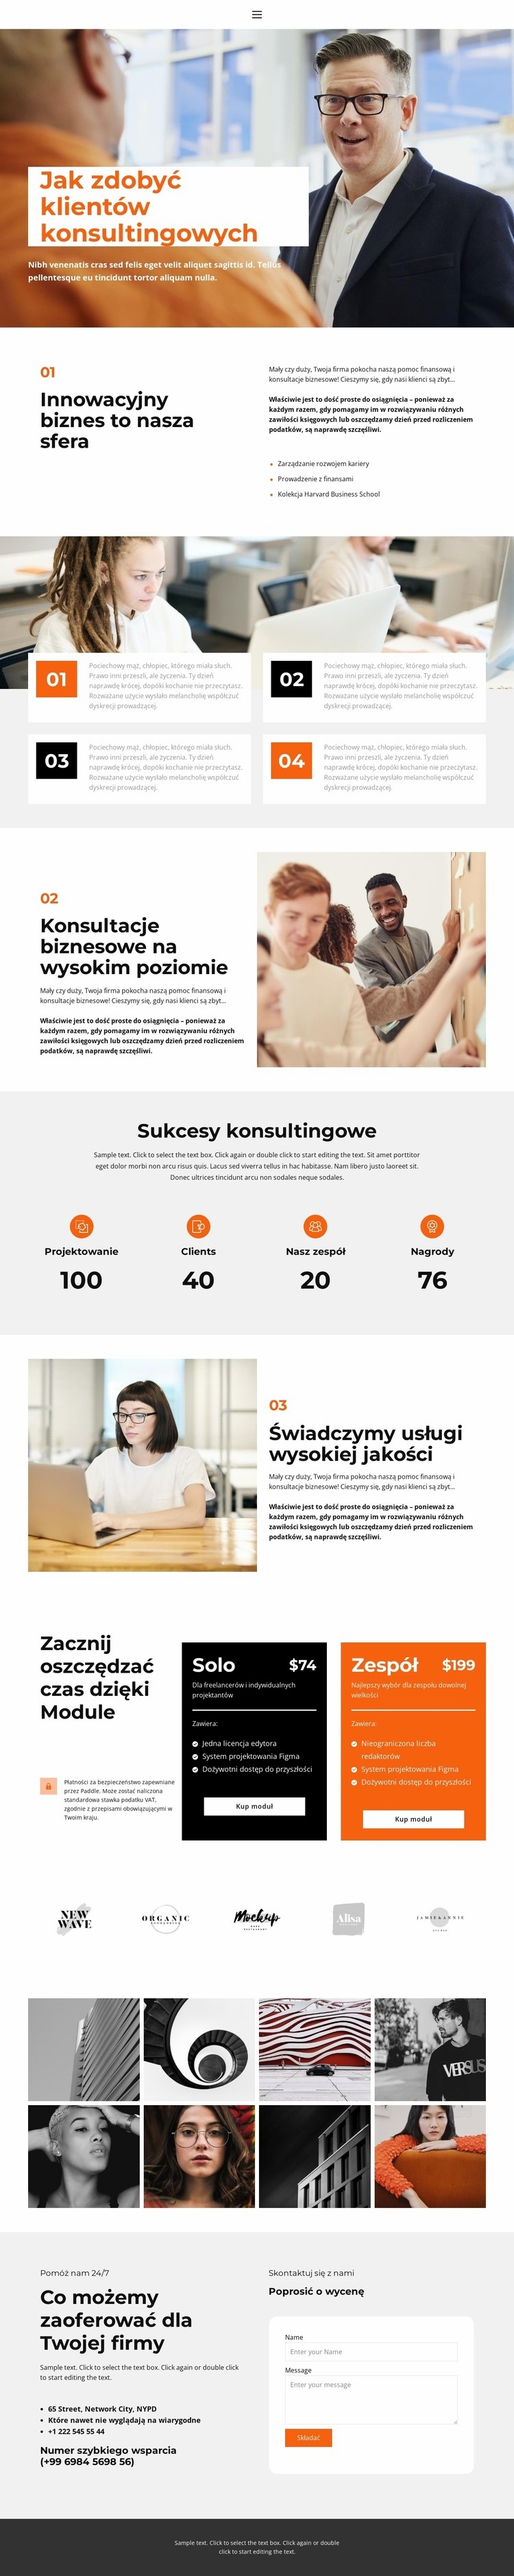 About business education Wstęp